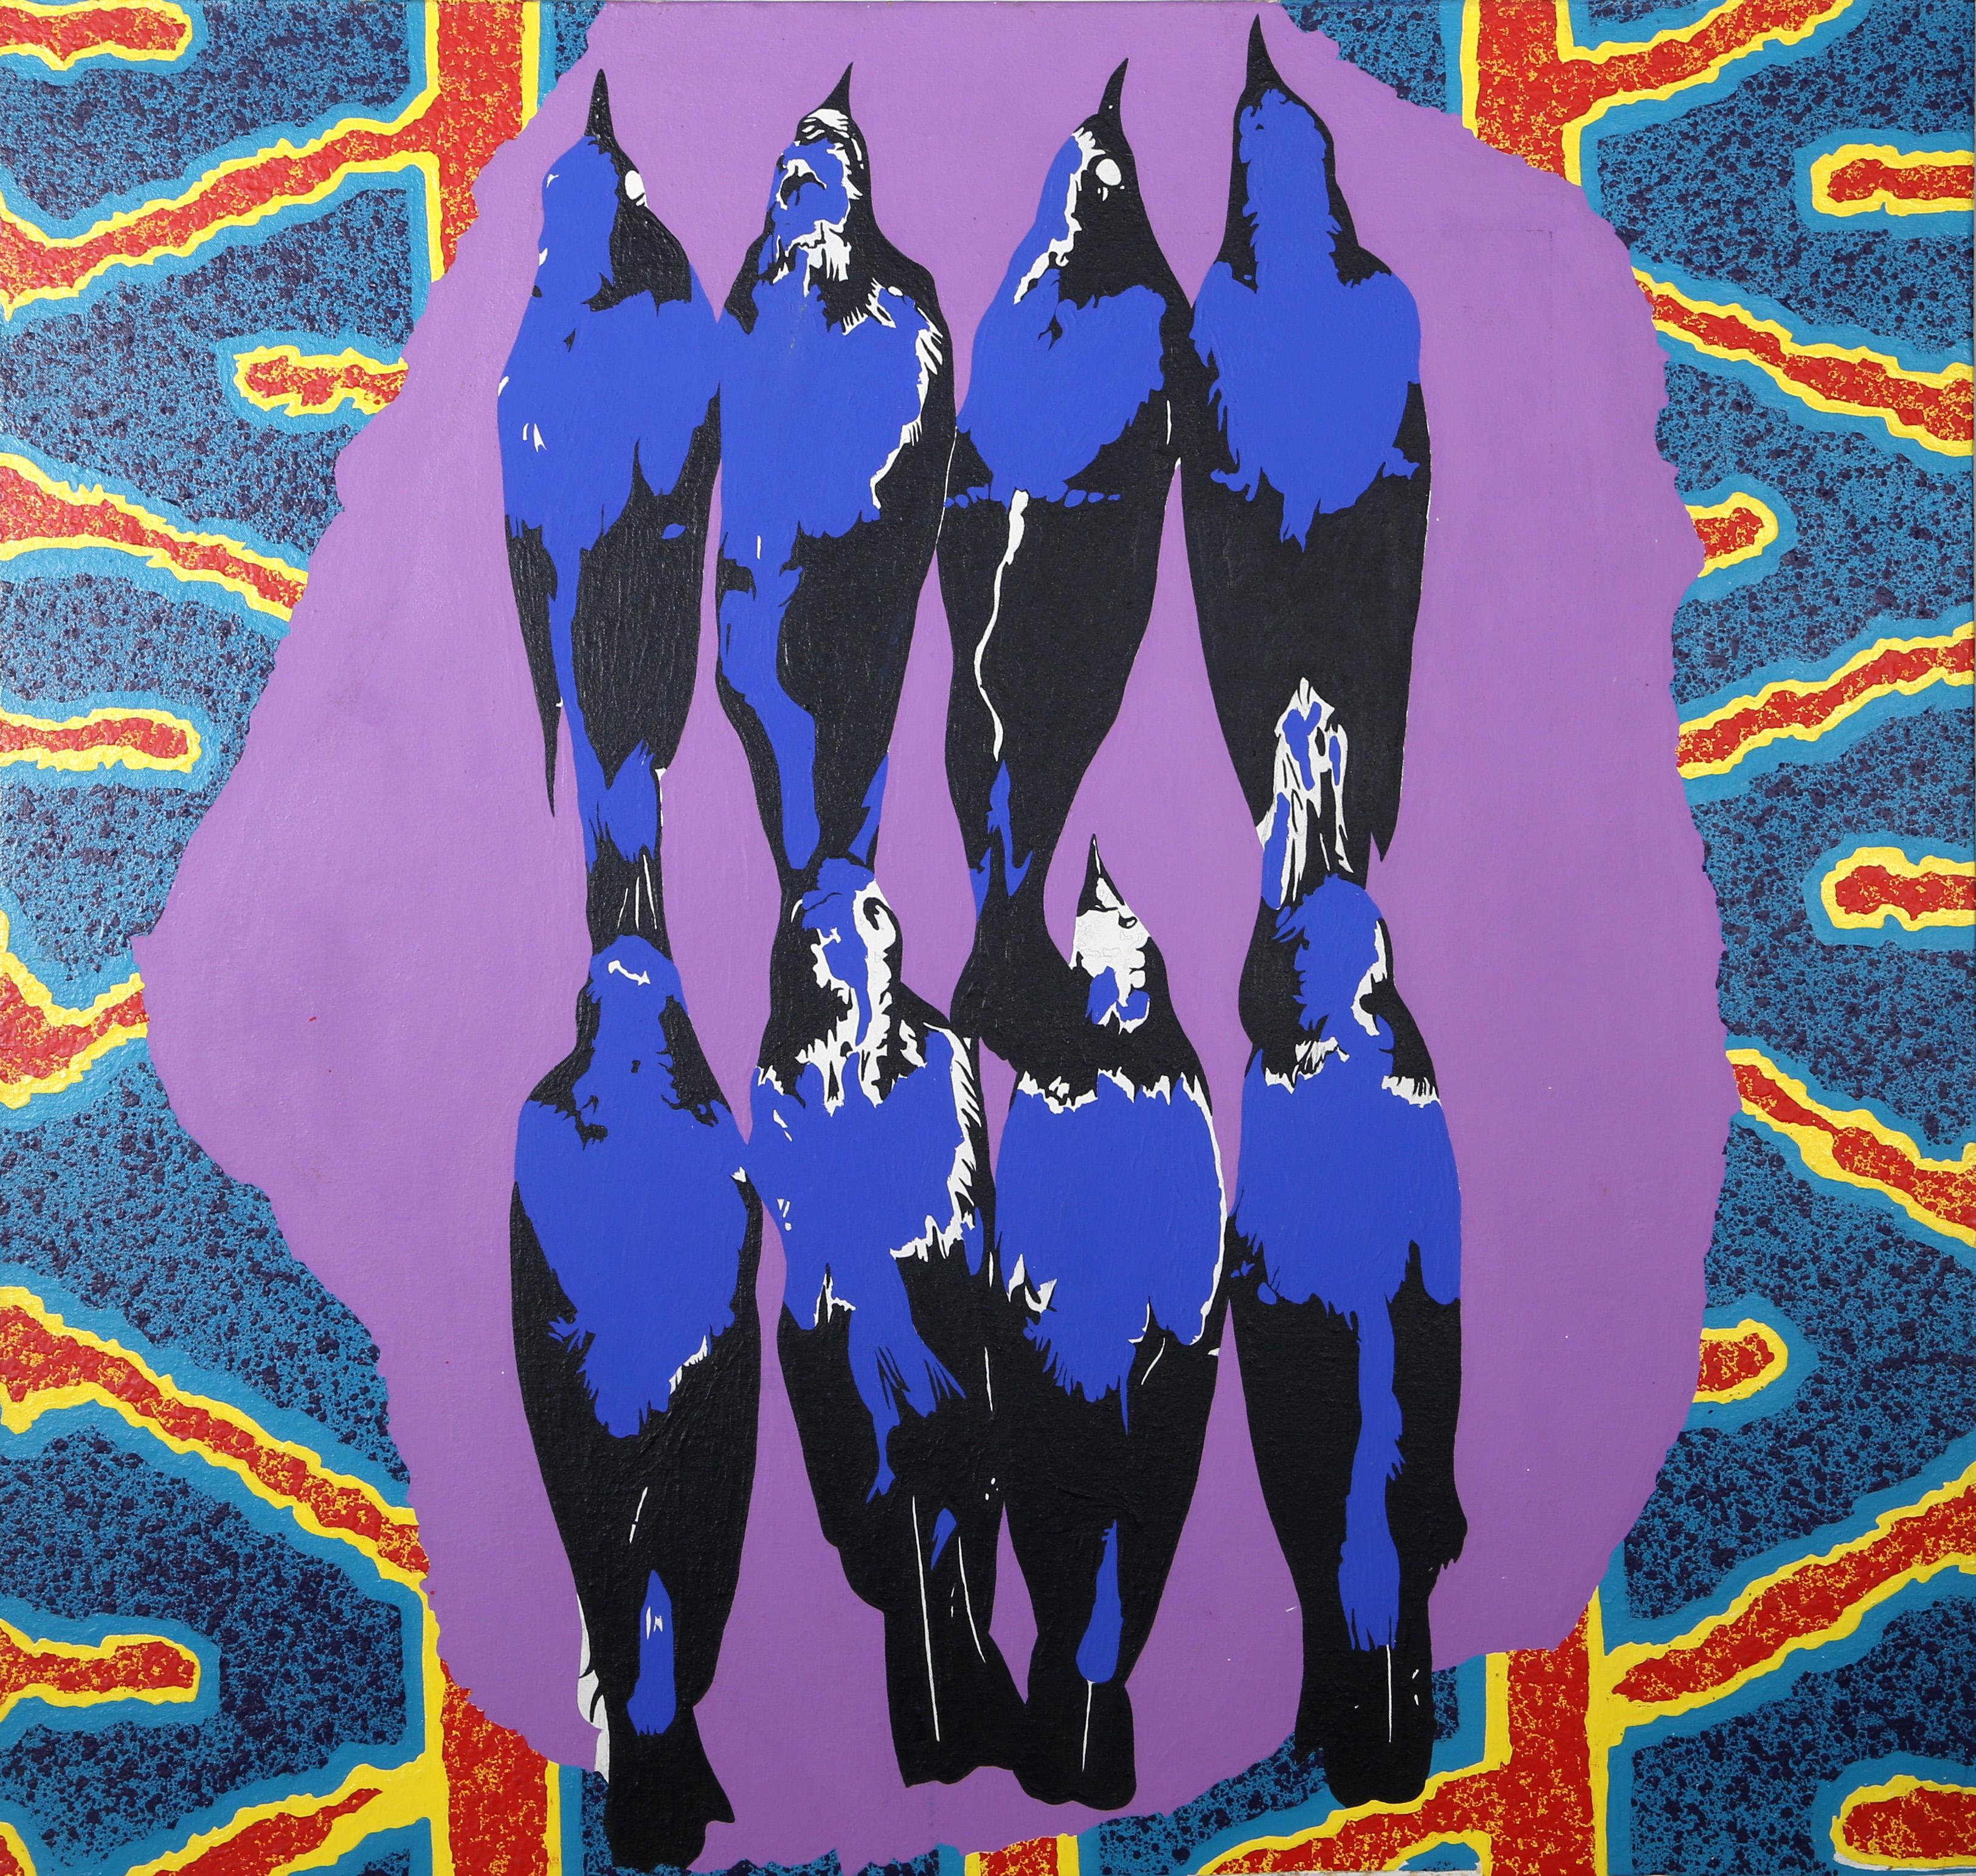 Save Our Souls
Michael Knigin, American (1942–2011)
Date: circa 1992
Acrylic on Canvas
Size: 38 x 40 in. (96.52 x 101.6 cm)

Eight electric blue crows are lined in two rows against a psychedelic and neon background. This is a dynamic painting by Pop